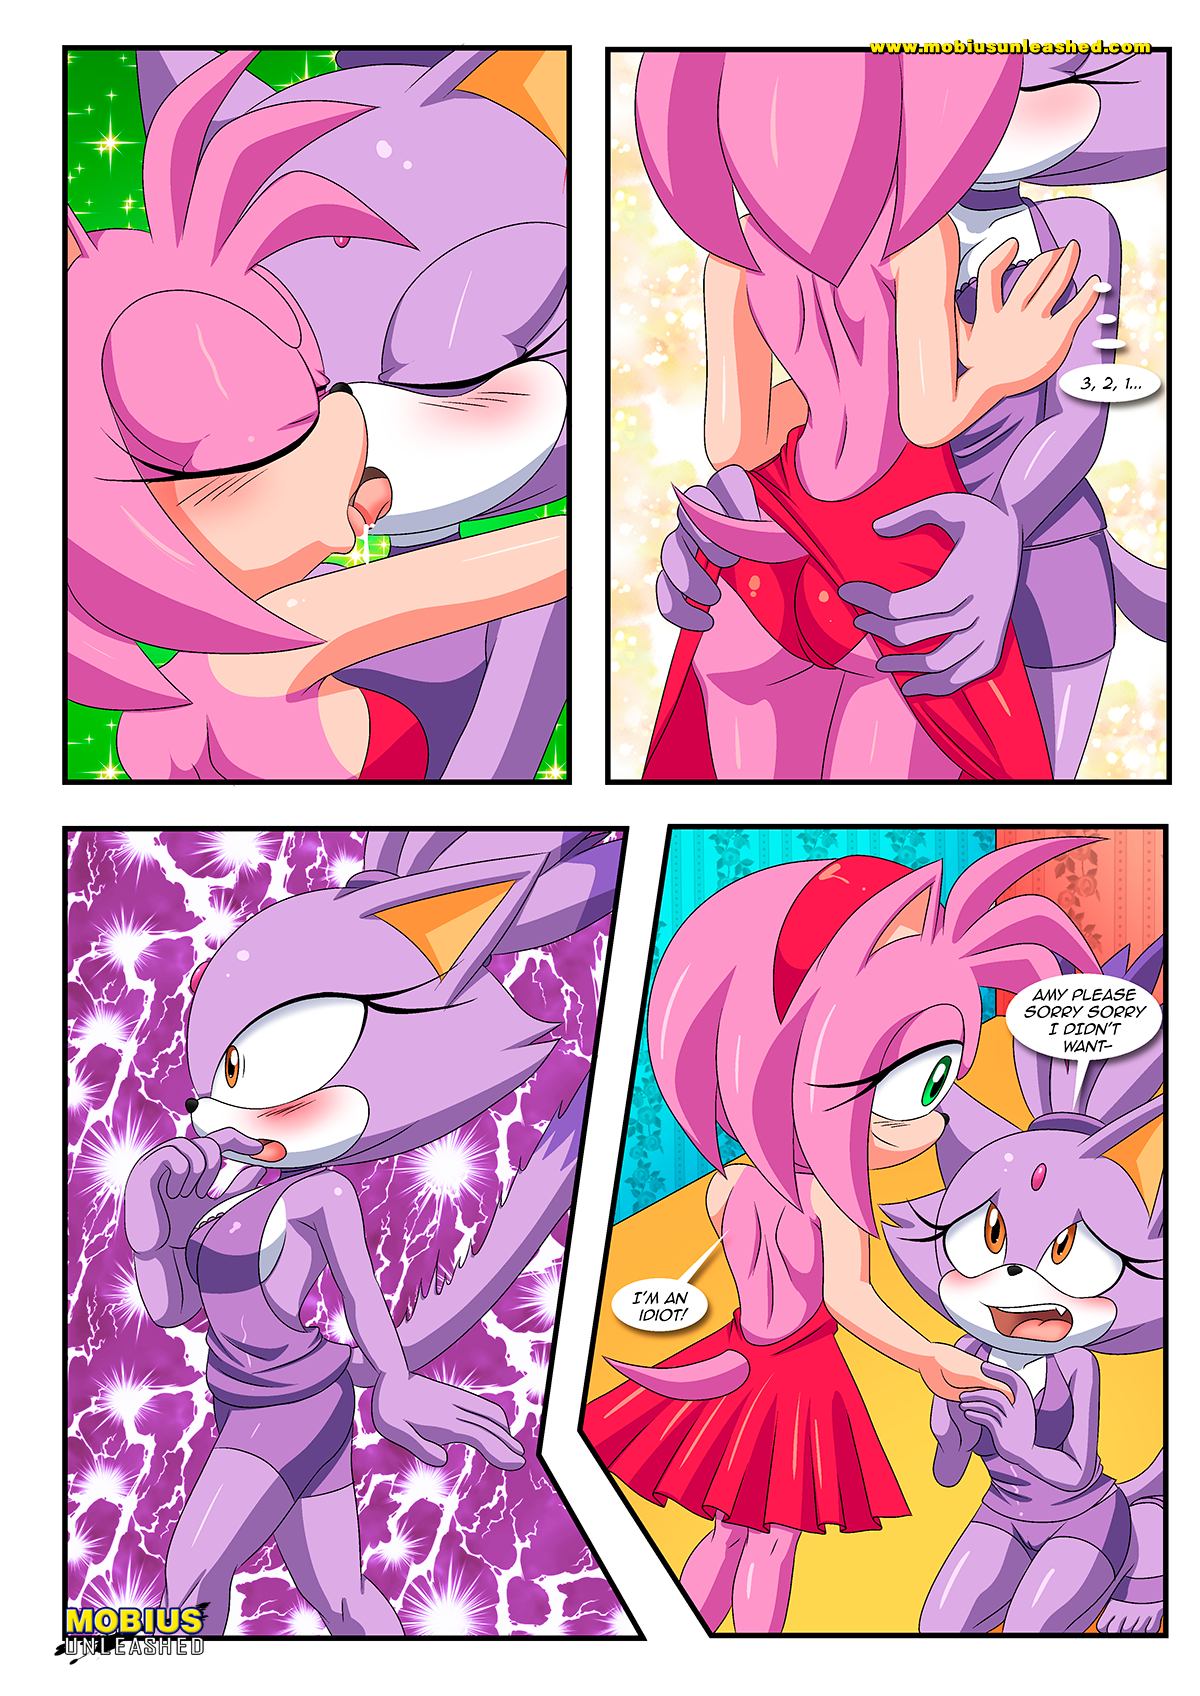 Amy rose is a lesbian in sonic the comic